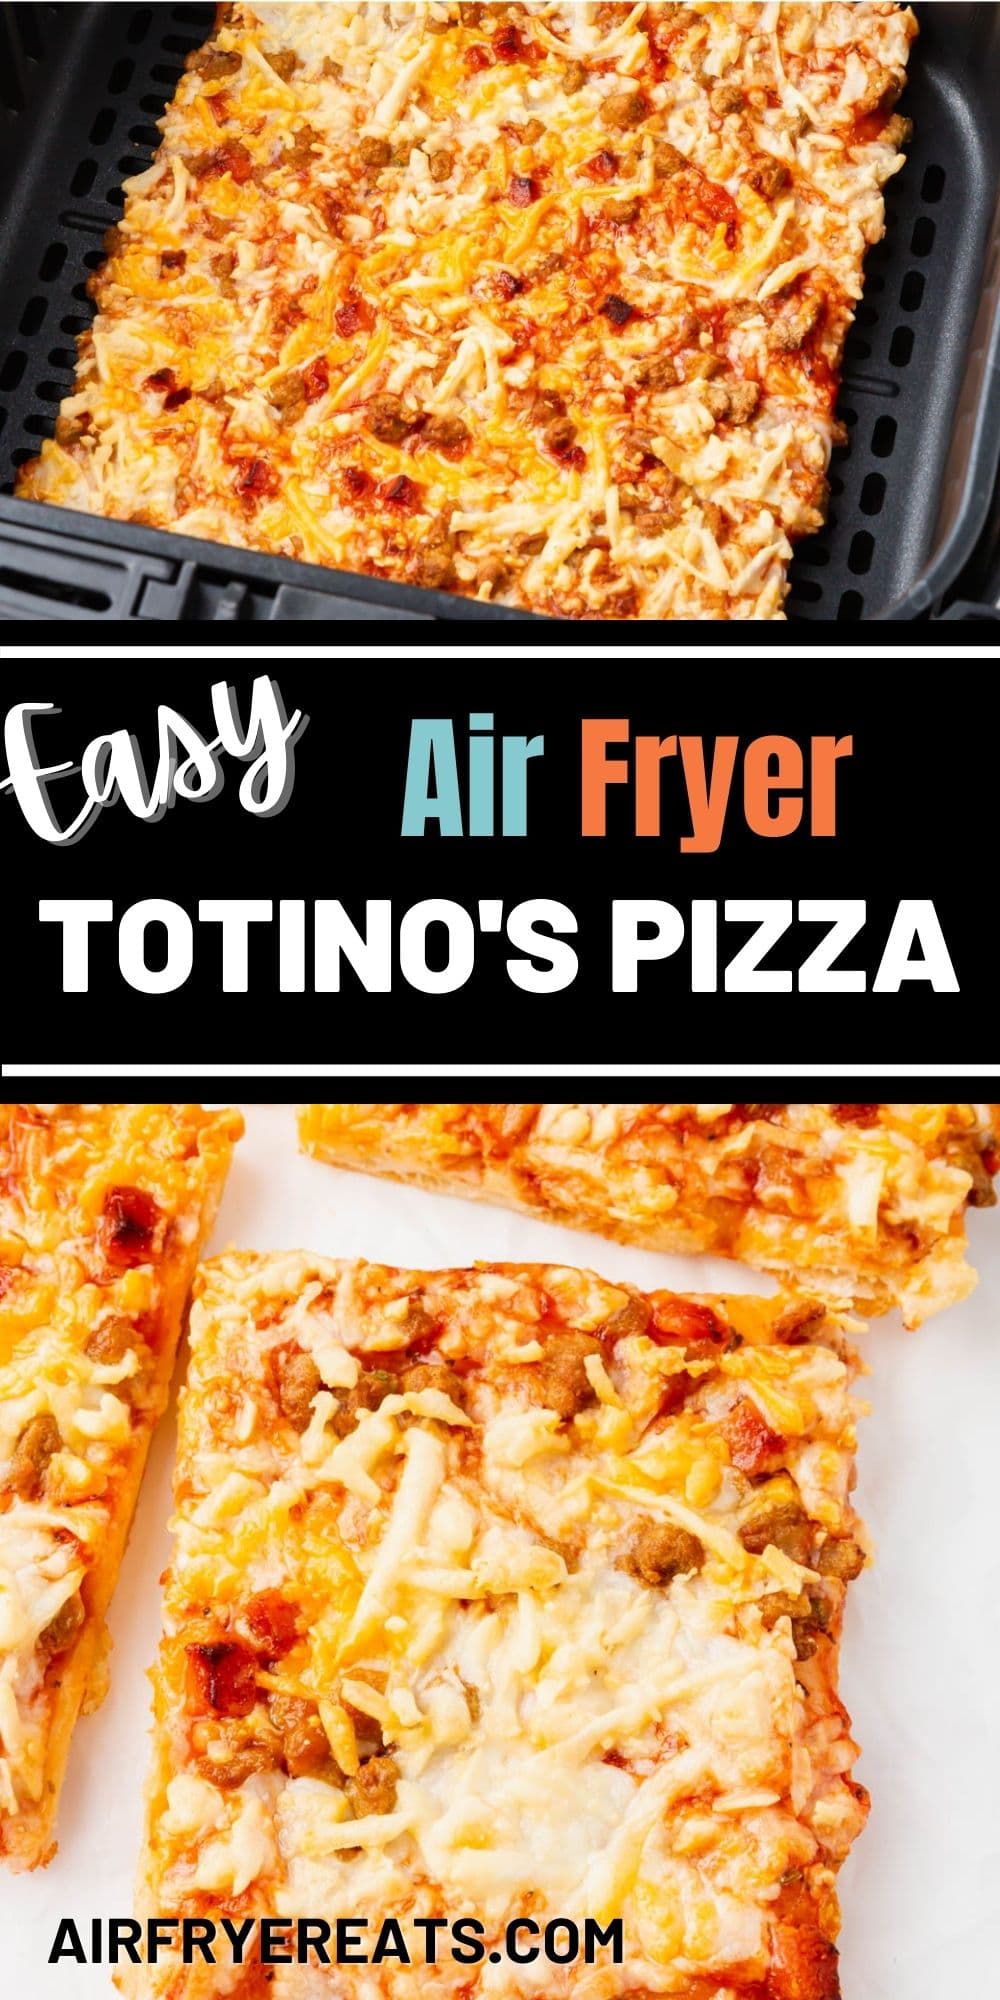 Cooked Totino's pizza in an air fryer basket with overlay text